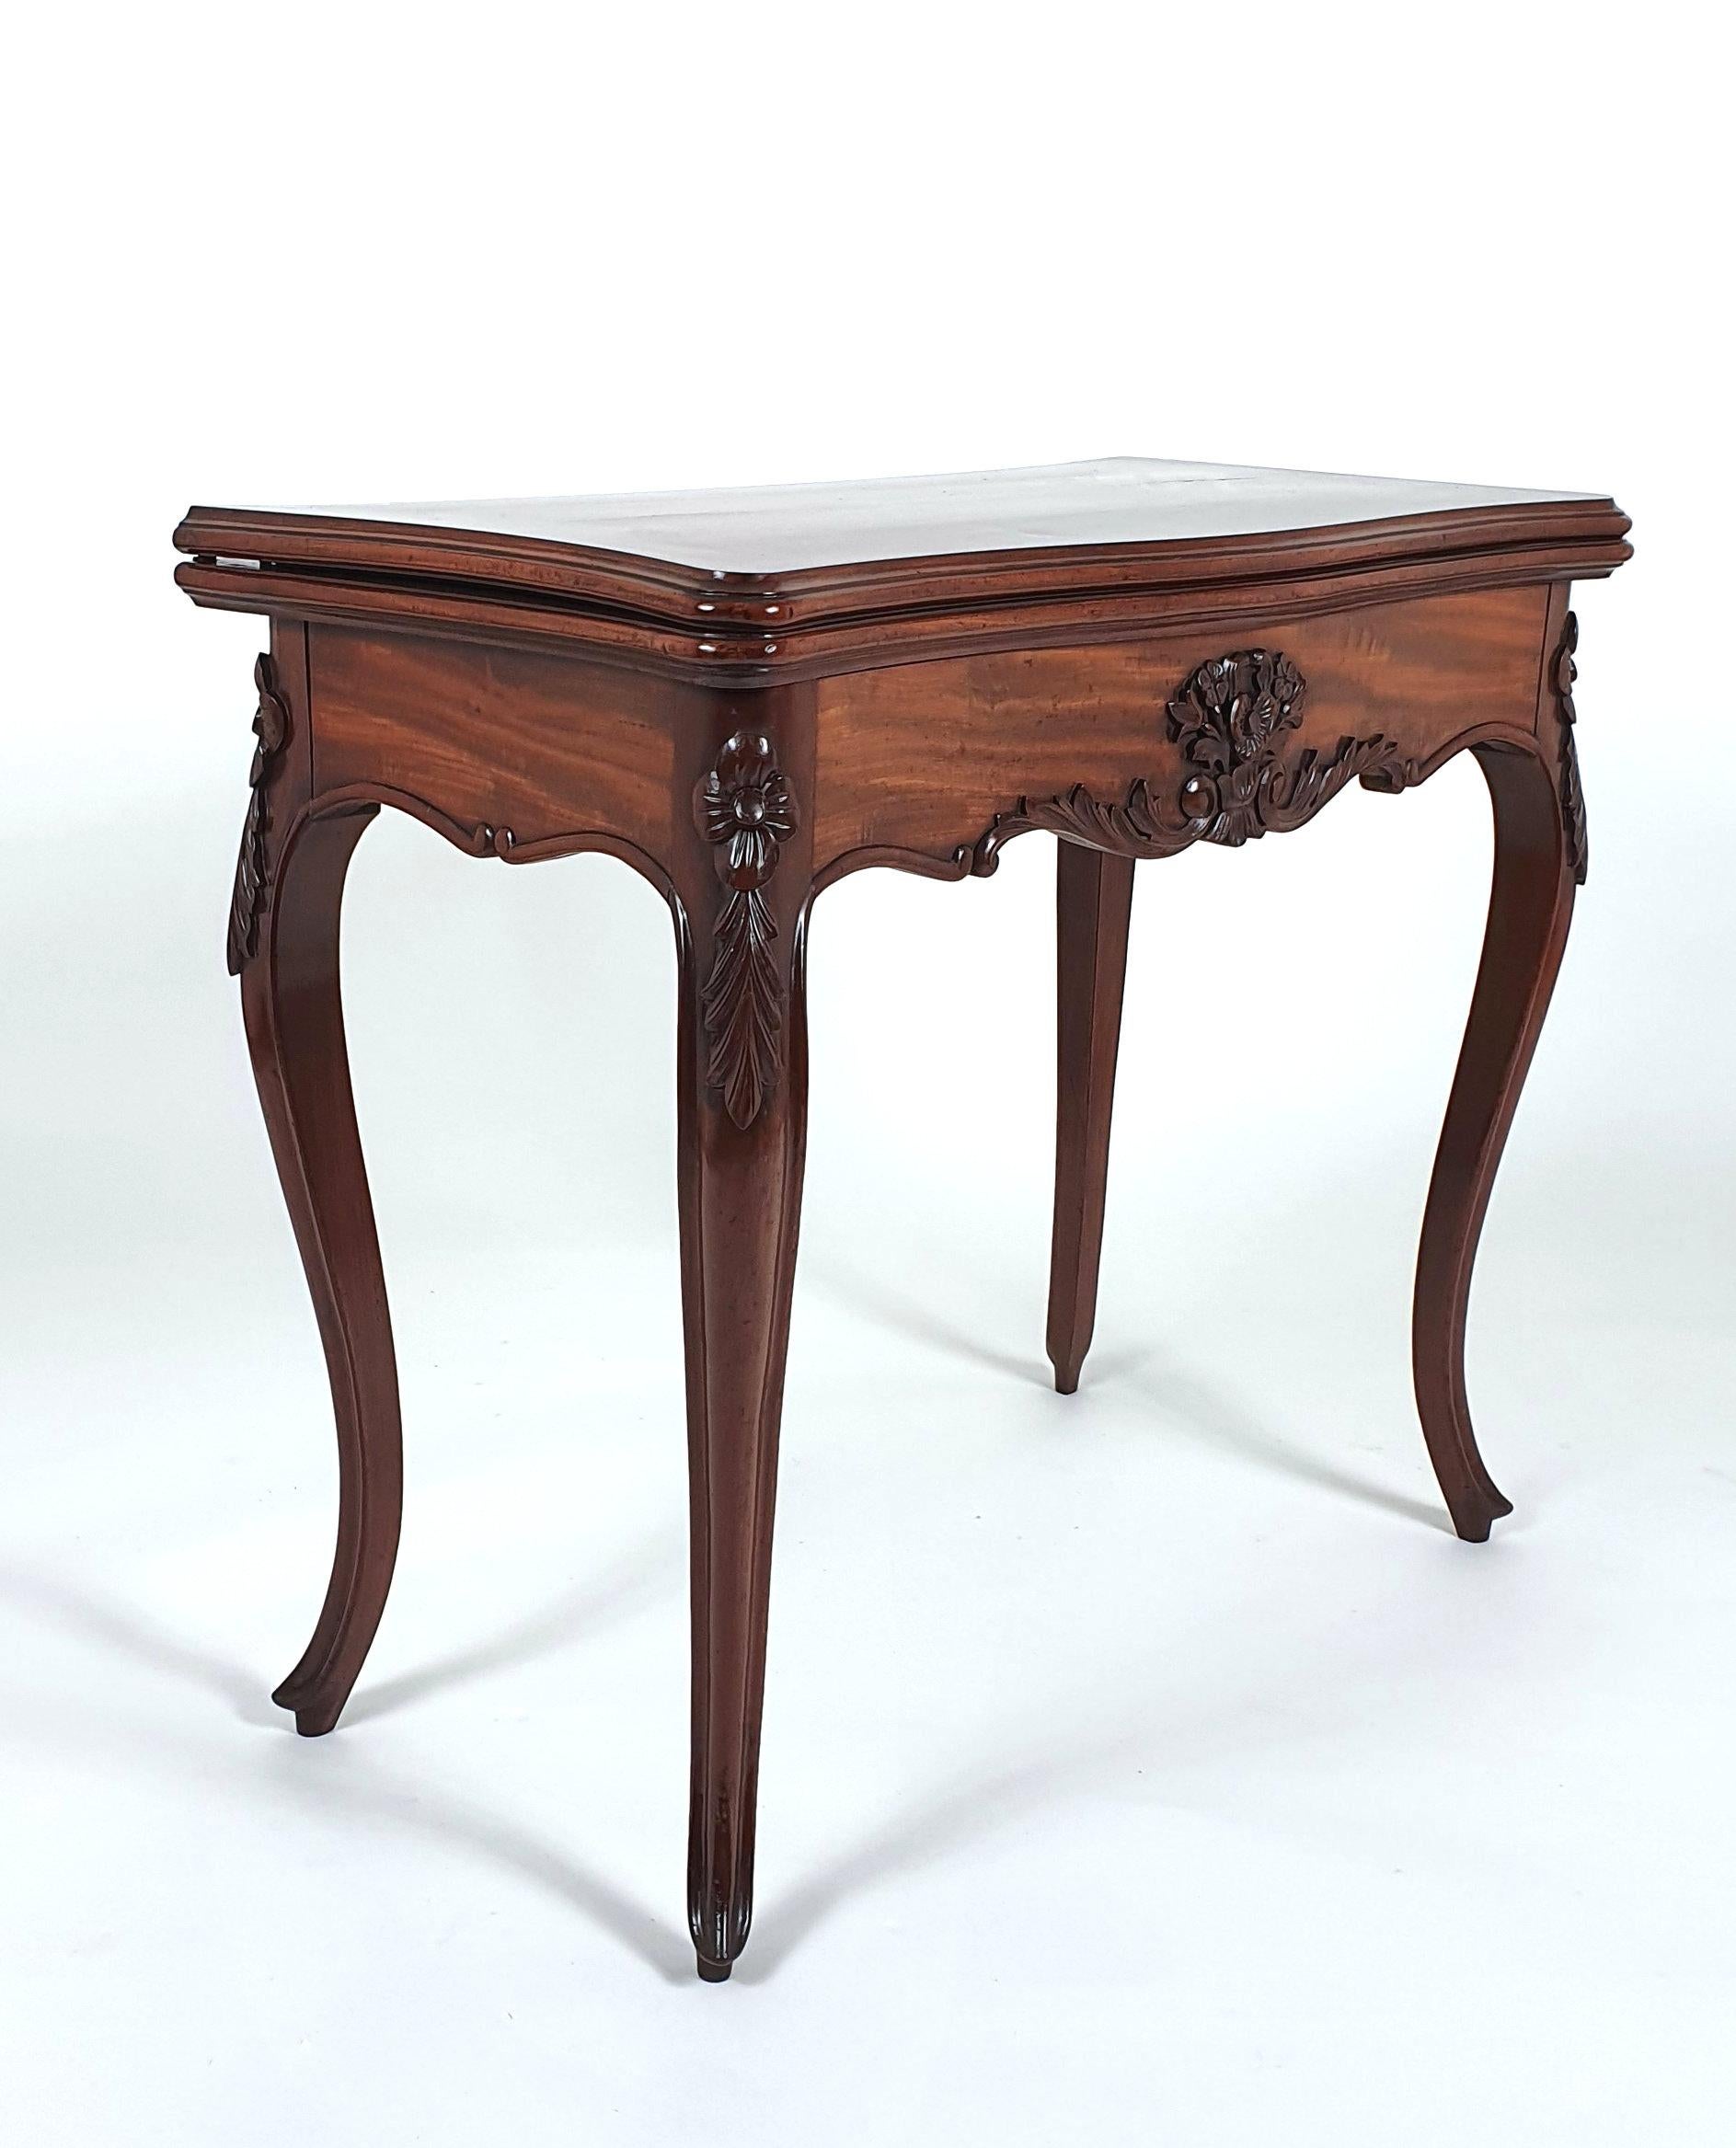 Baize 19th Century French Figured Mahogany Fold-Over Card Table For Sale